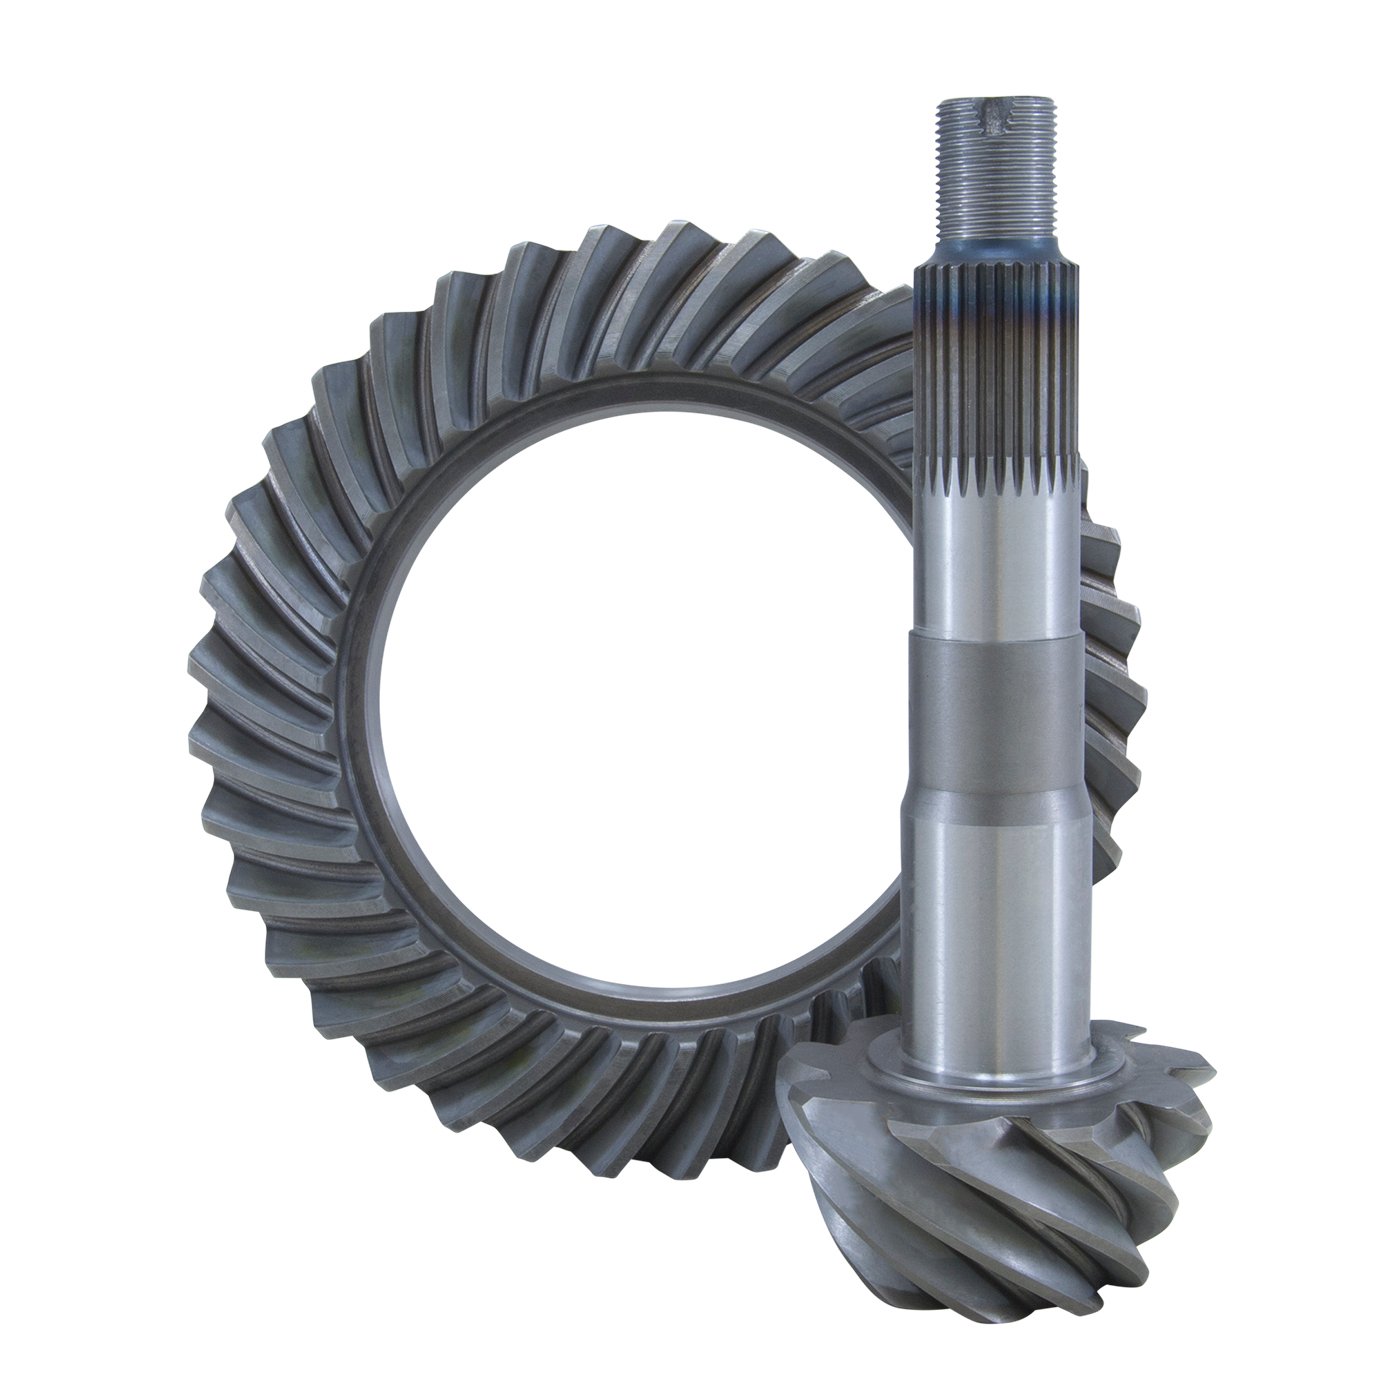 High Performance Ring & Pinion Gear Set For Toyota V6 In A 3.73 Ratio